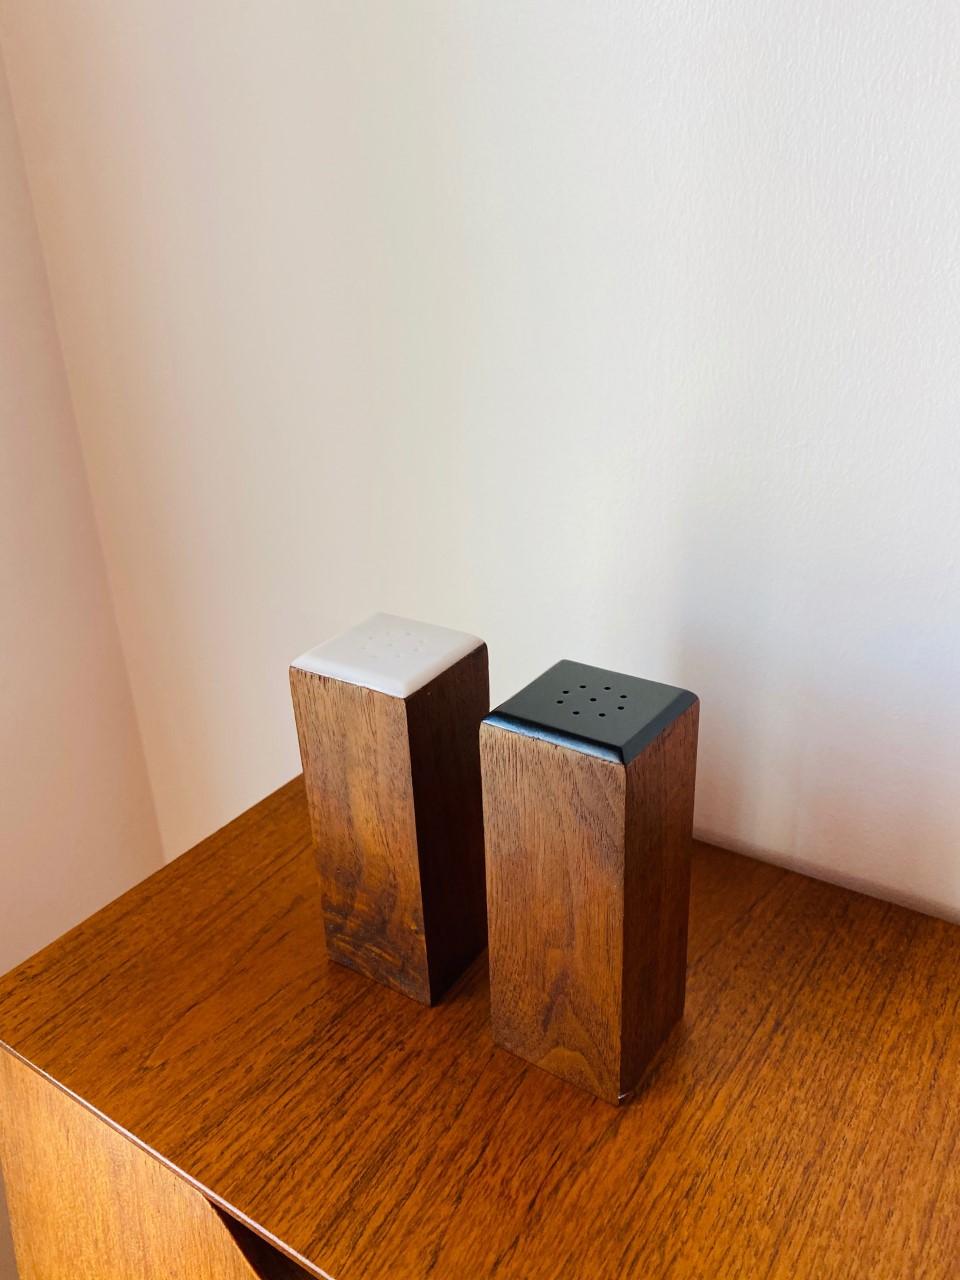 Sculptural and timeless. Beautiful pair of modernist rosewood salt & pepper shakers. Each is beautifully constructed with high design in mind. The elegant lines are tall and clean. The top of the salt shaker is white while the top for the pepper